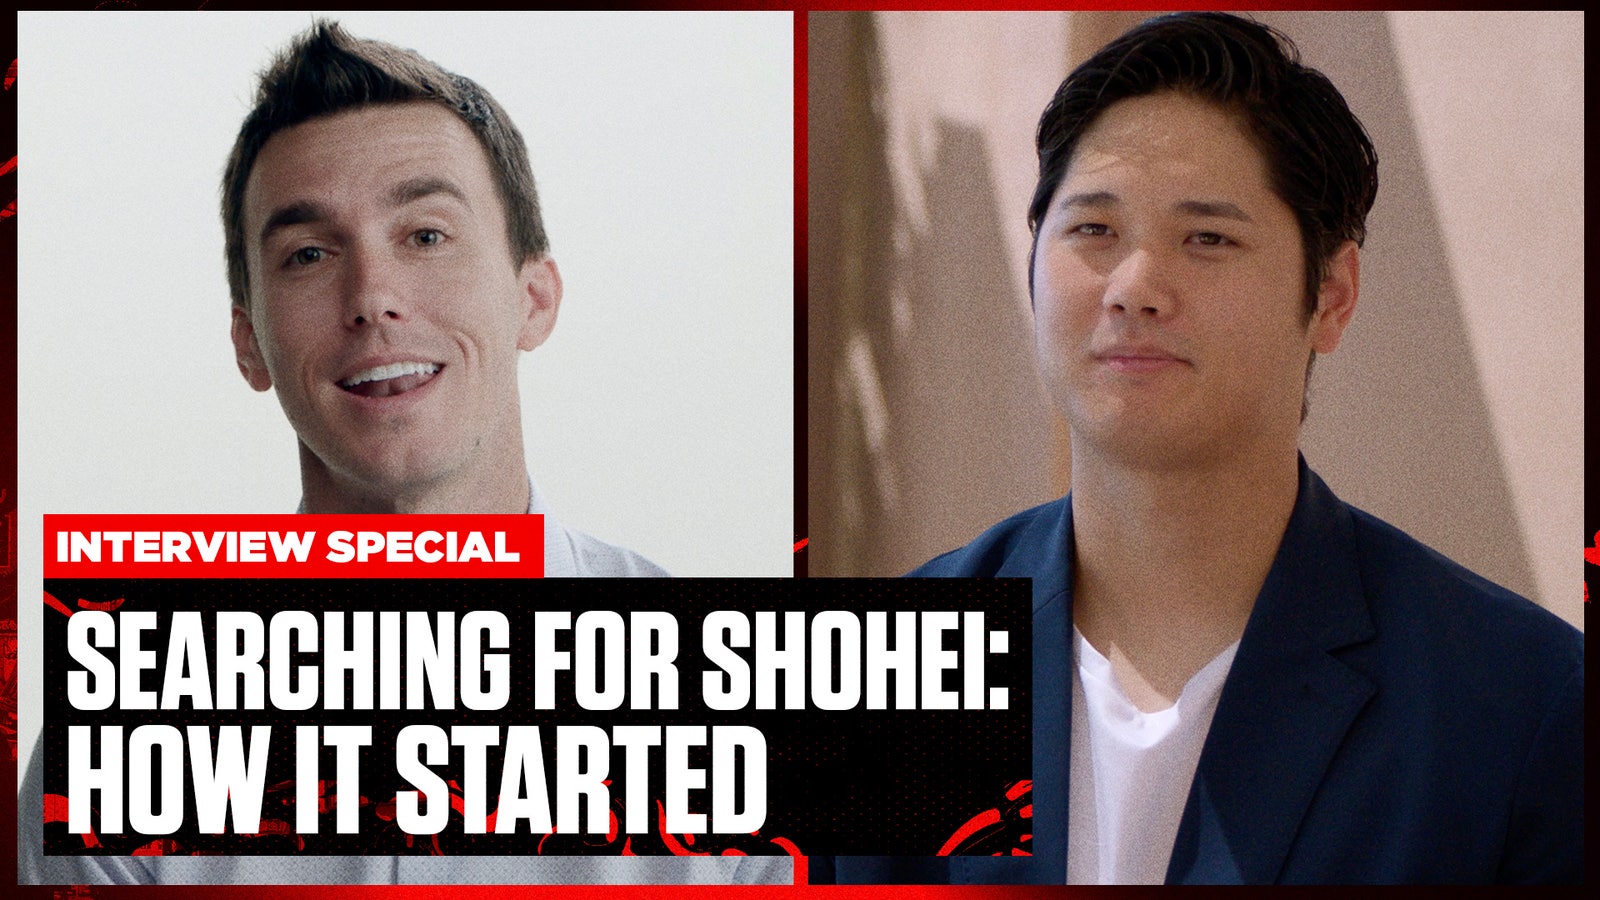 Searching For Shohei: How Ben Verlander got to sit down with Ohtani for an interview special